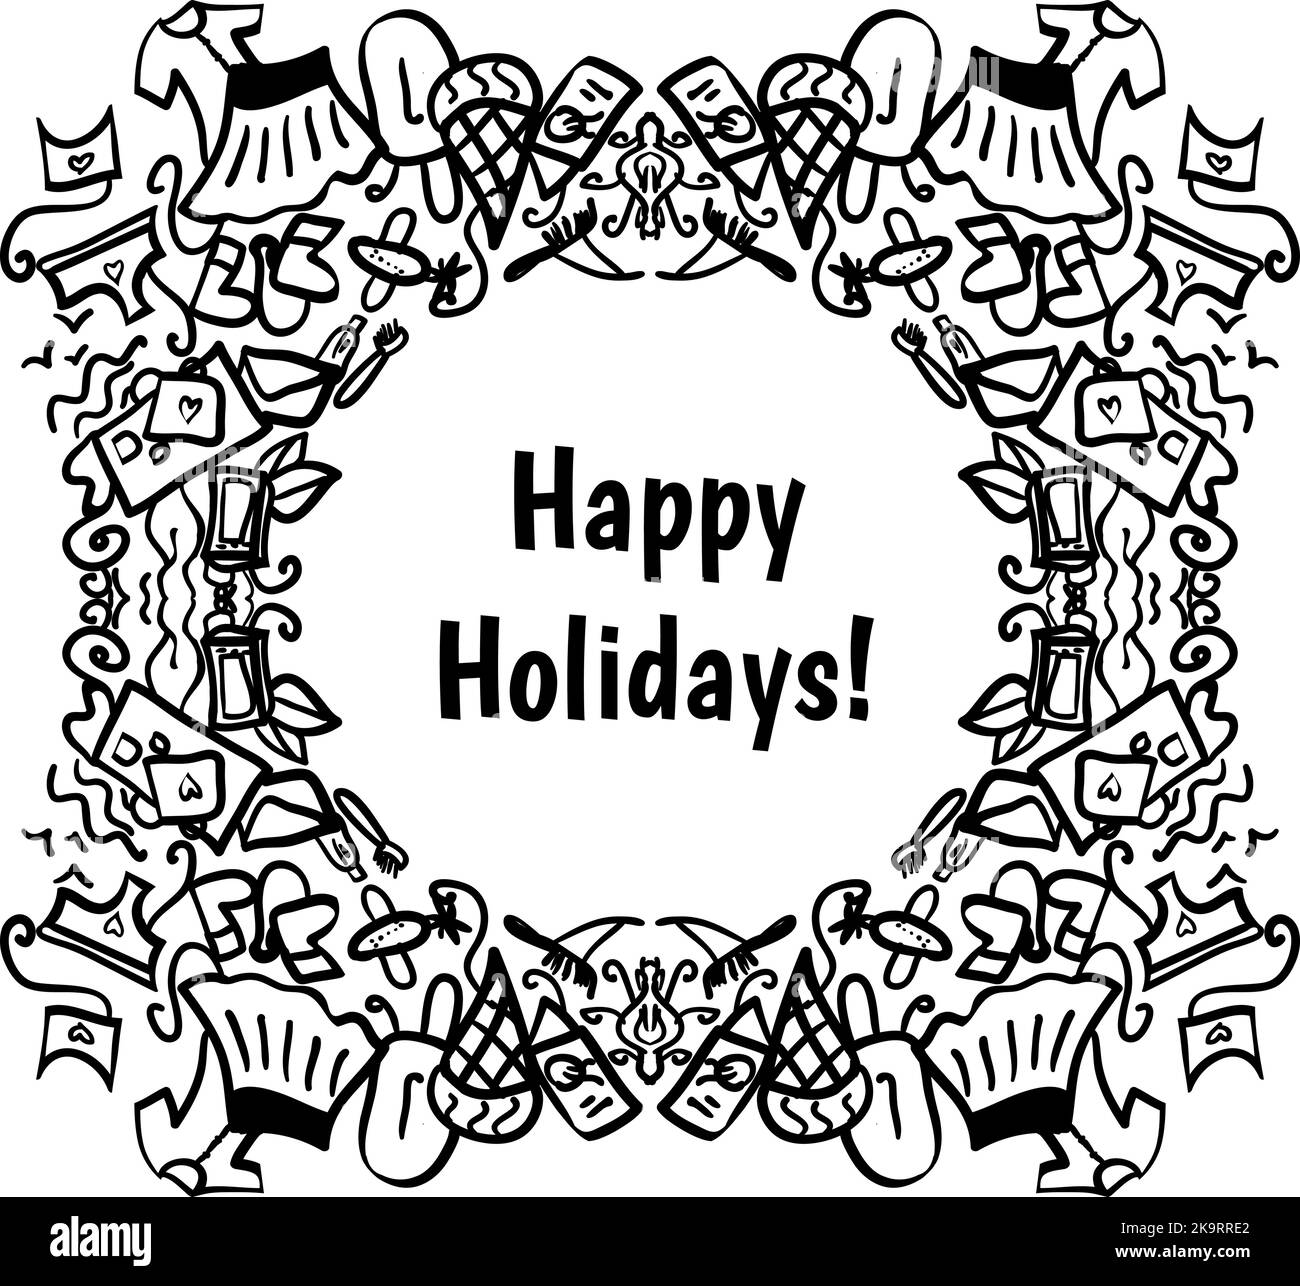 Abstract decorative frame with words Happy Holidays! Stock Vector